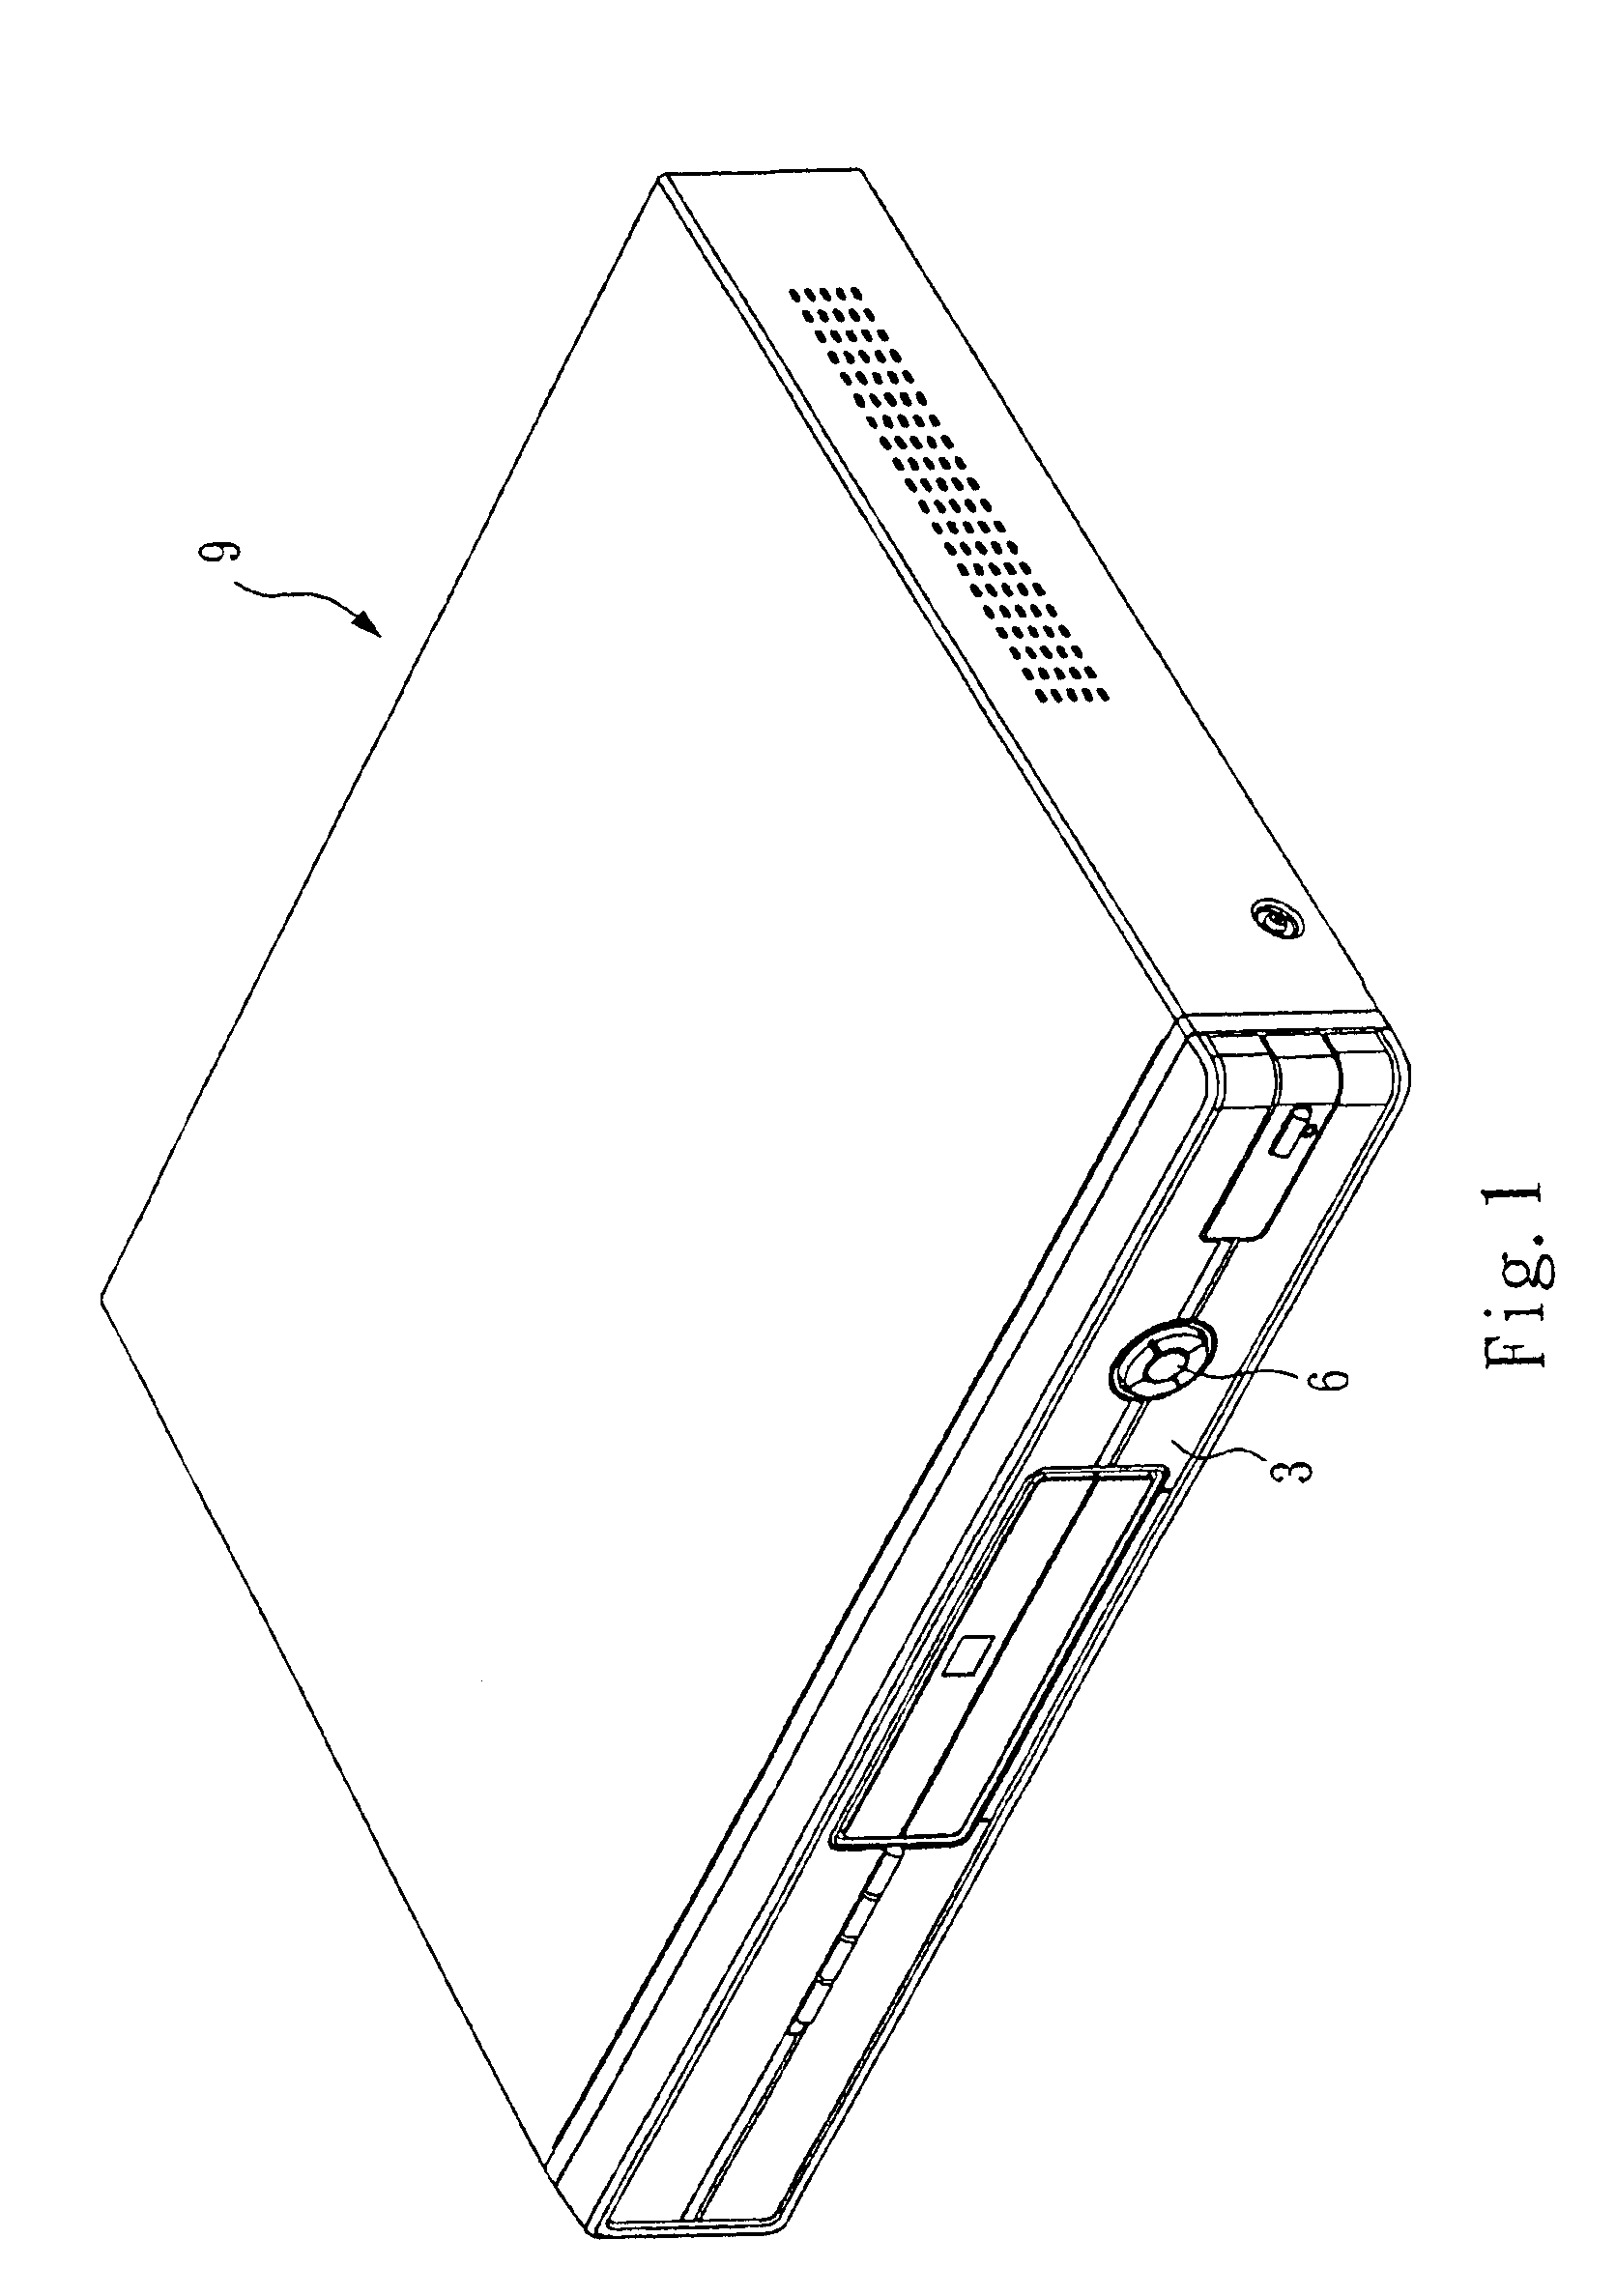 Multi-function control key structure